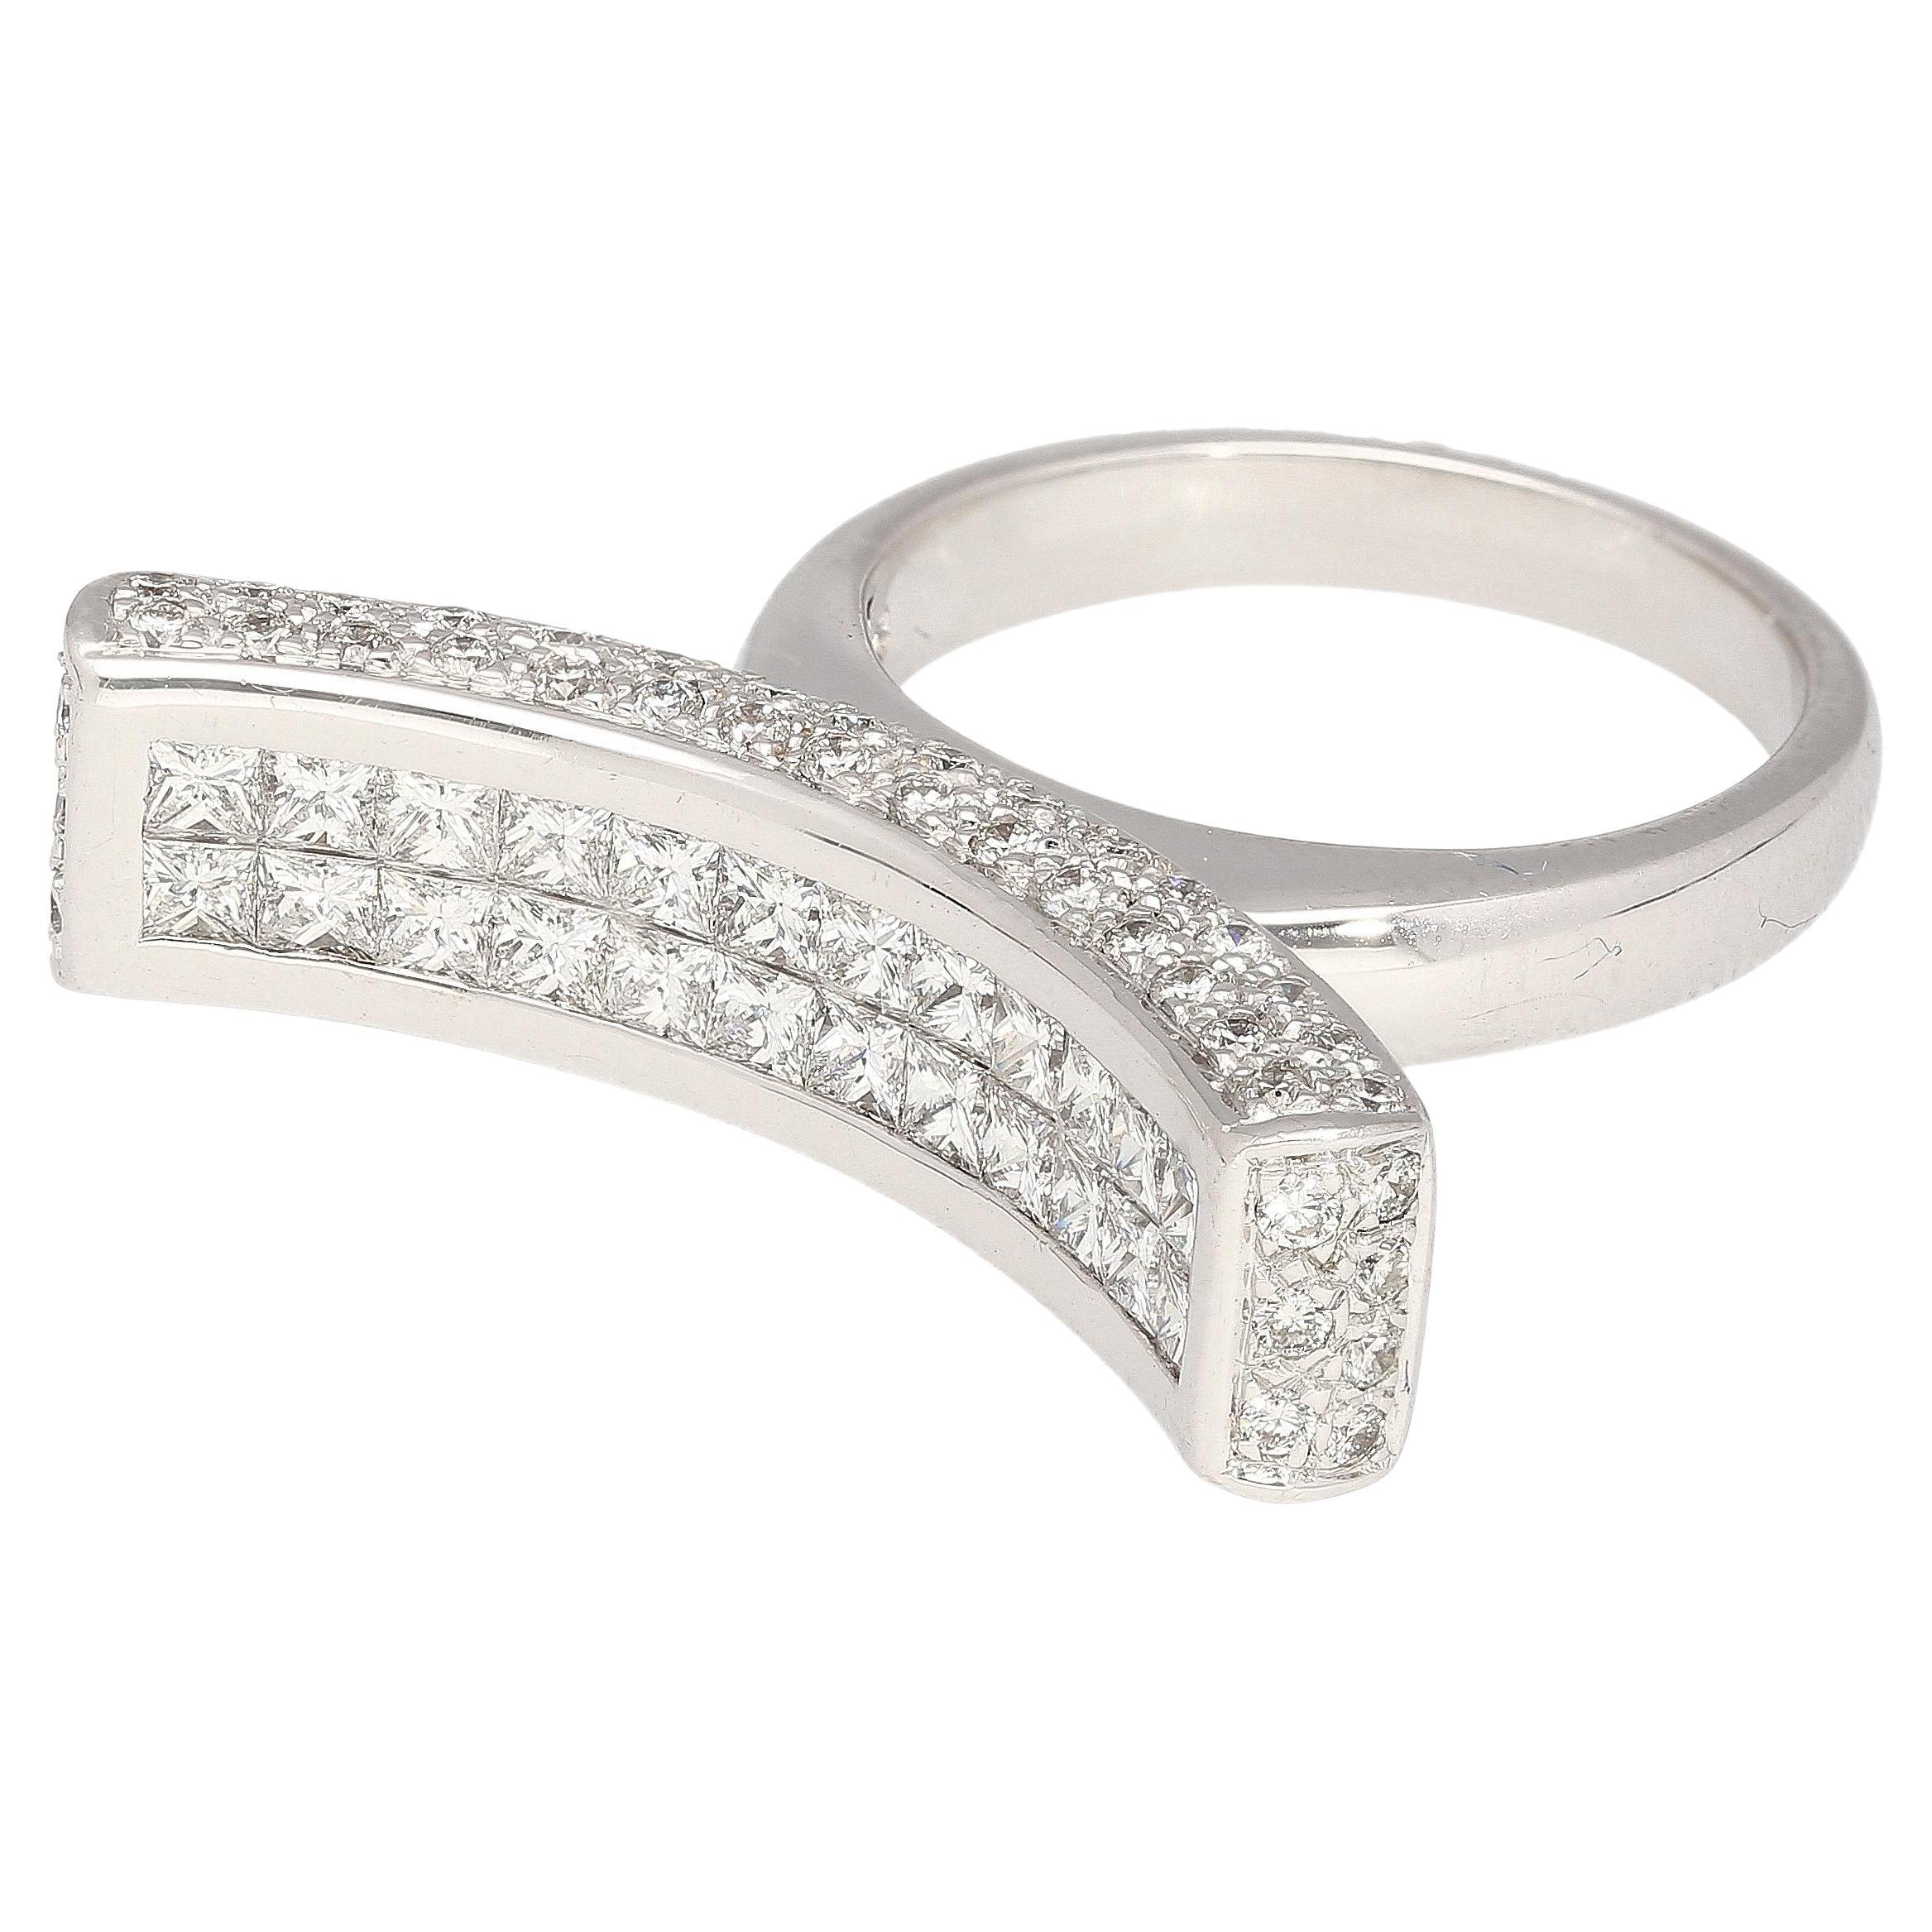 2 Carat Princess Cut Diamond Encrusted Curved Top Overlap Ring in 18K For Sale